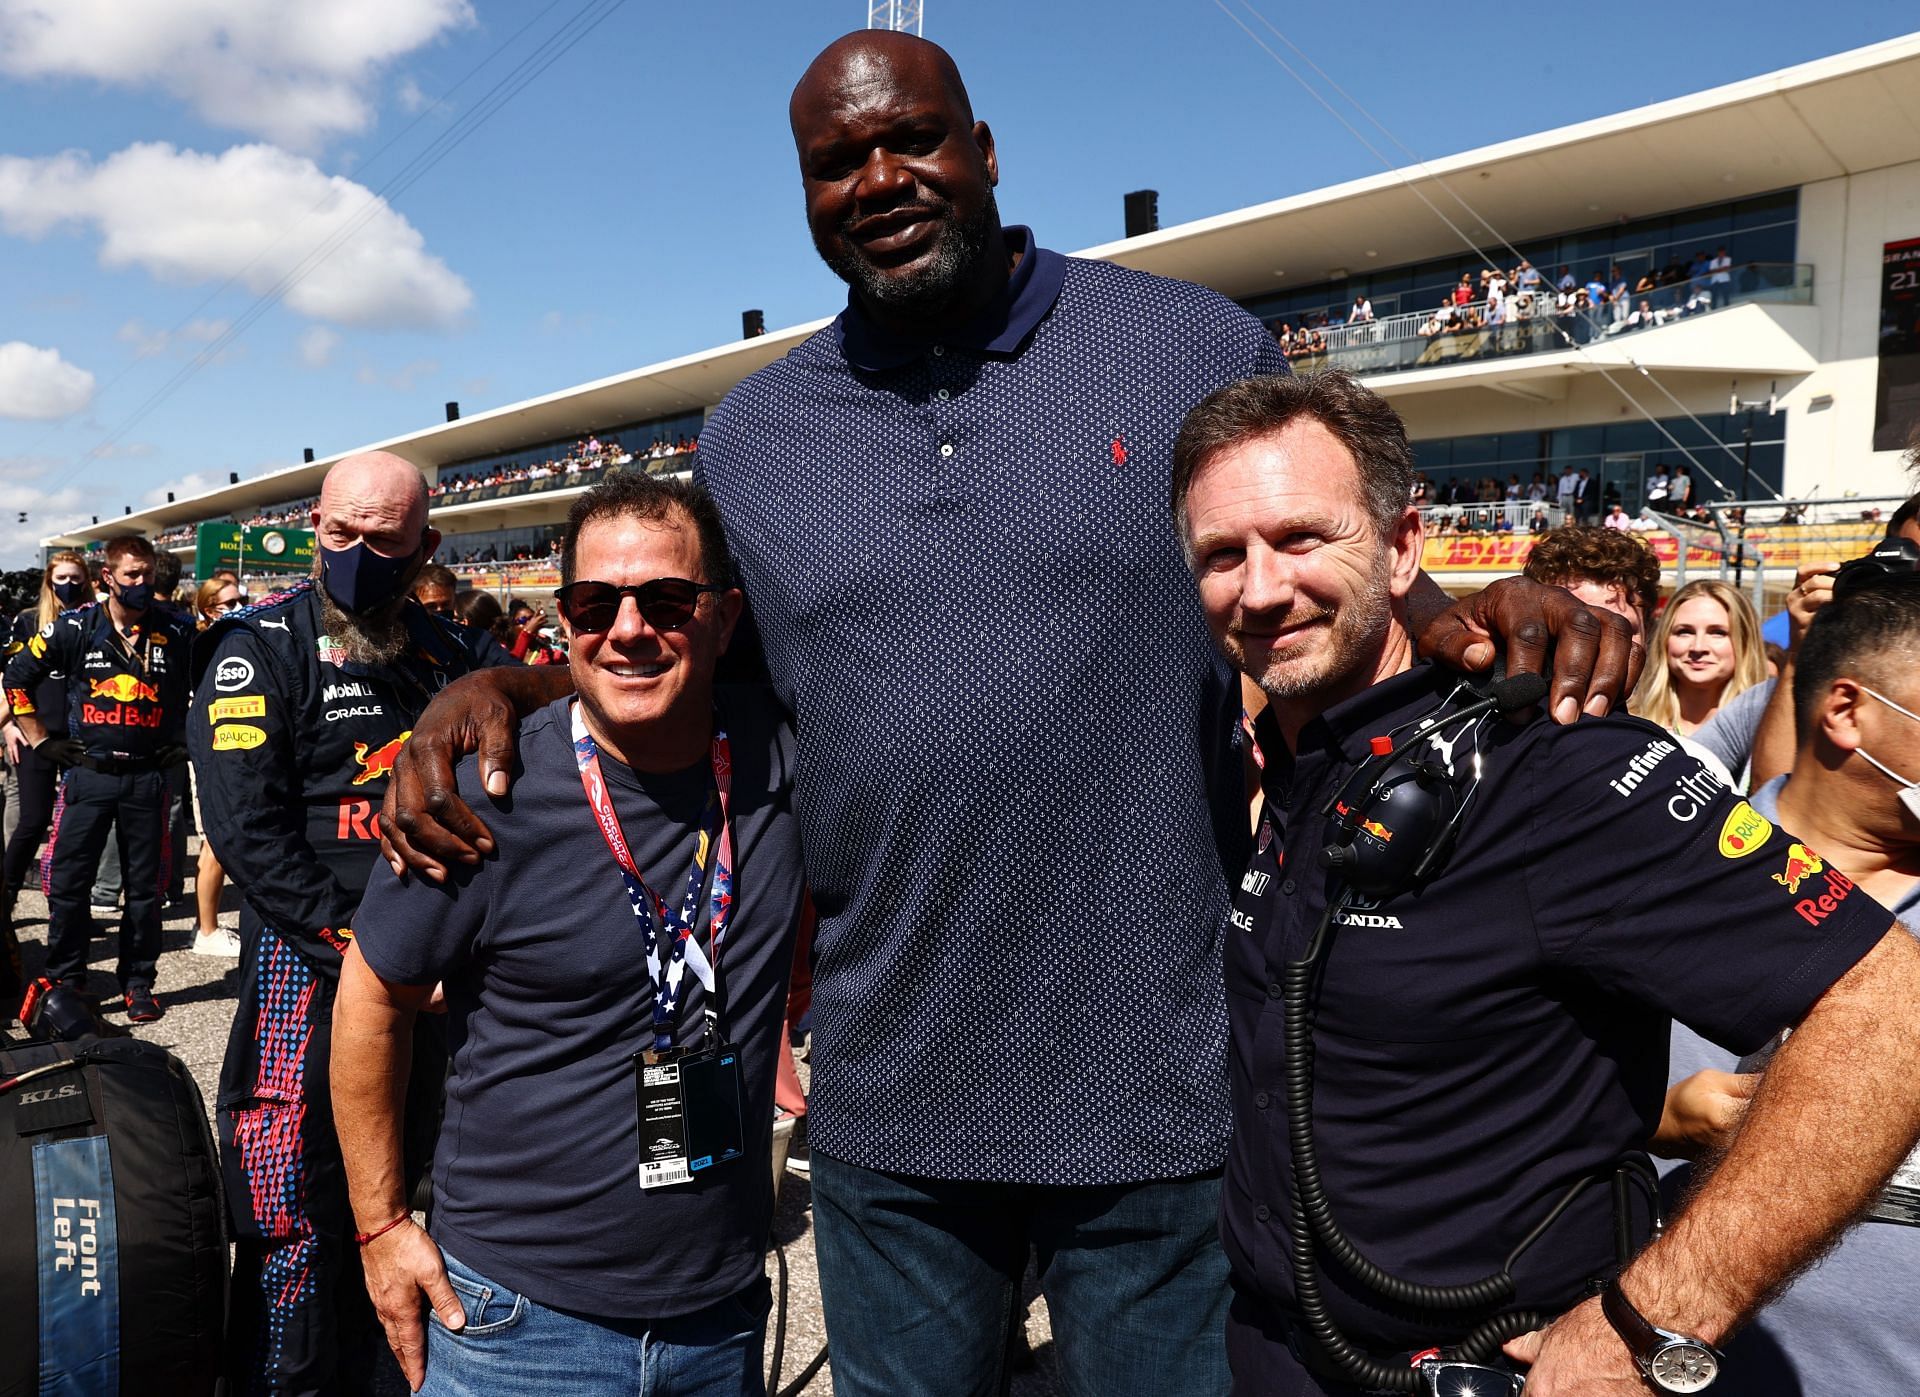 What size shoe does Shaquille O'Neal wear?